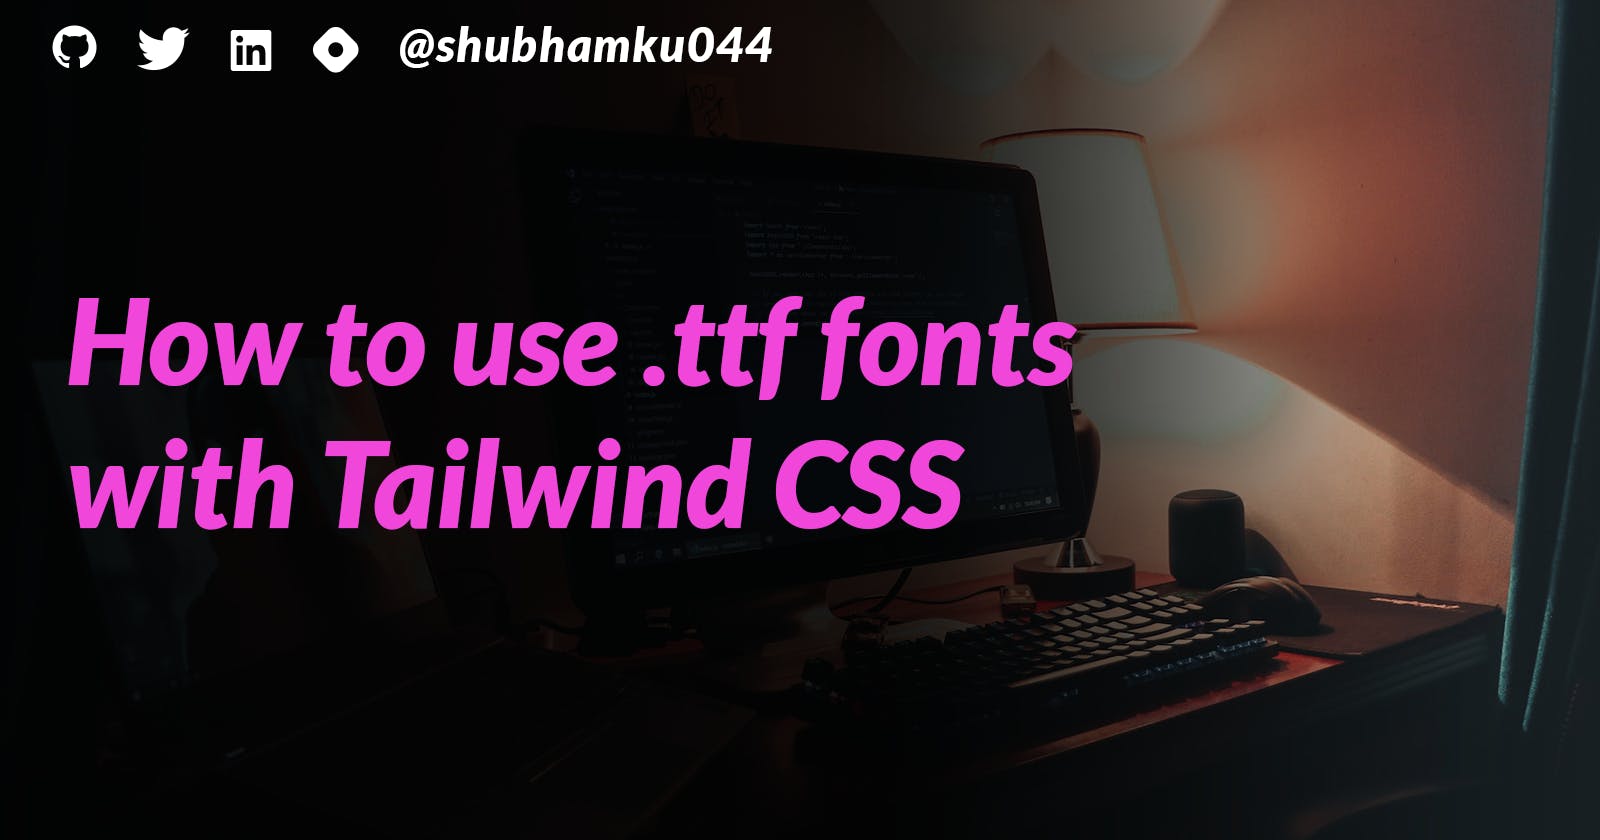 How to use .ttf fonts with Tailwind CSS